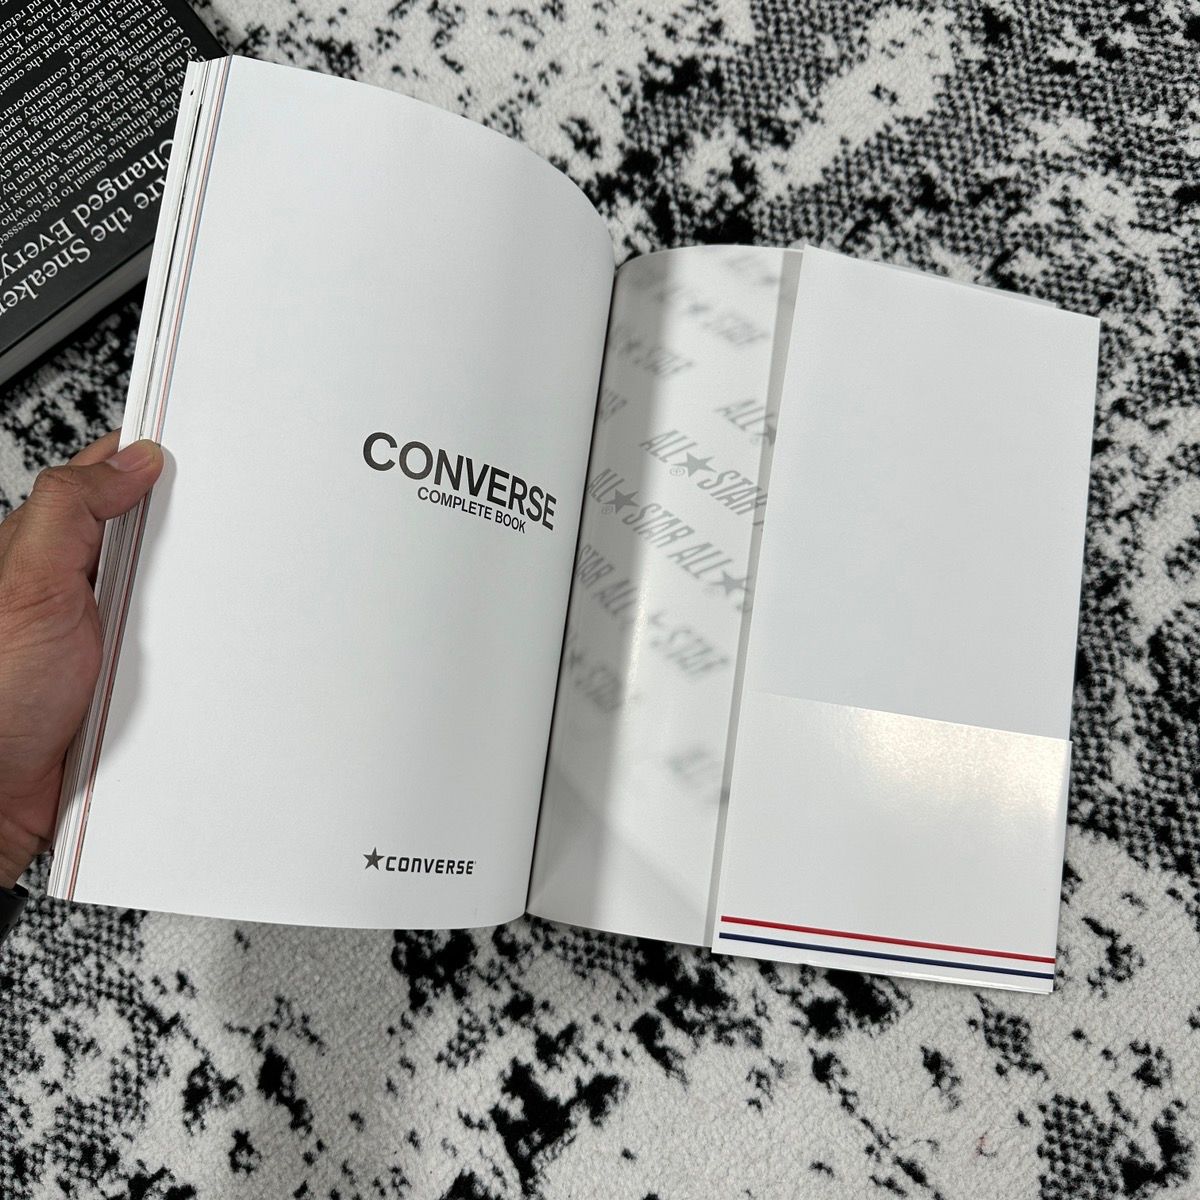 CONVERSE COMPLETE BOOK JAPAN EDITION - 4